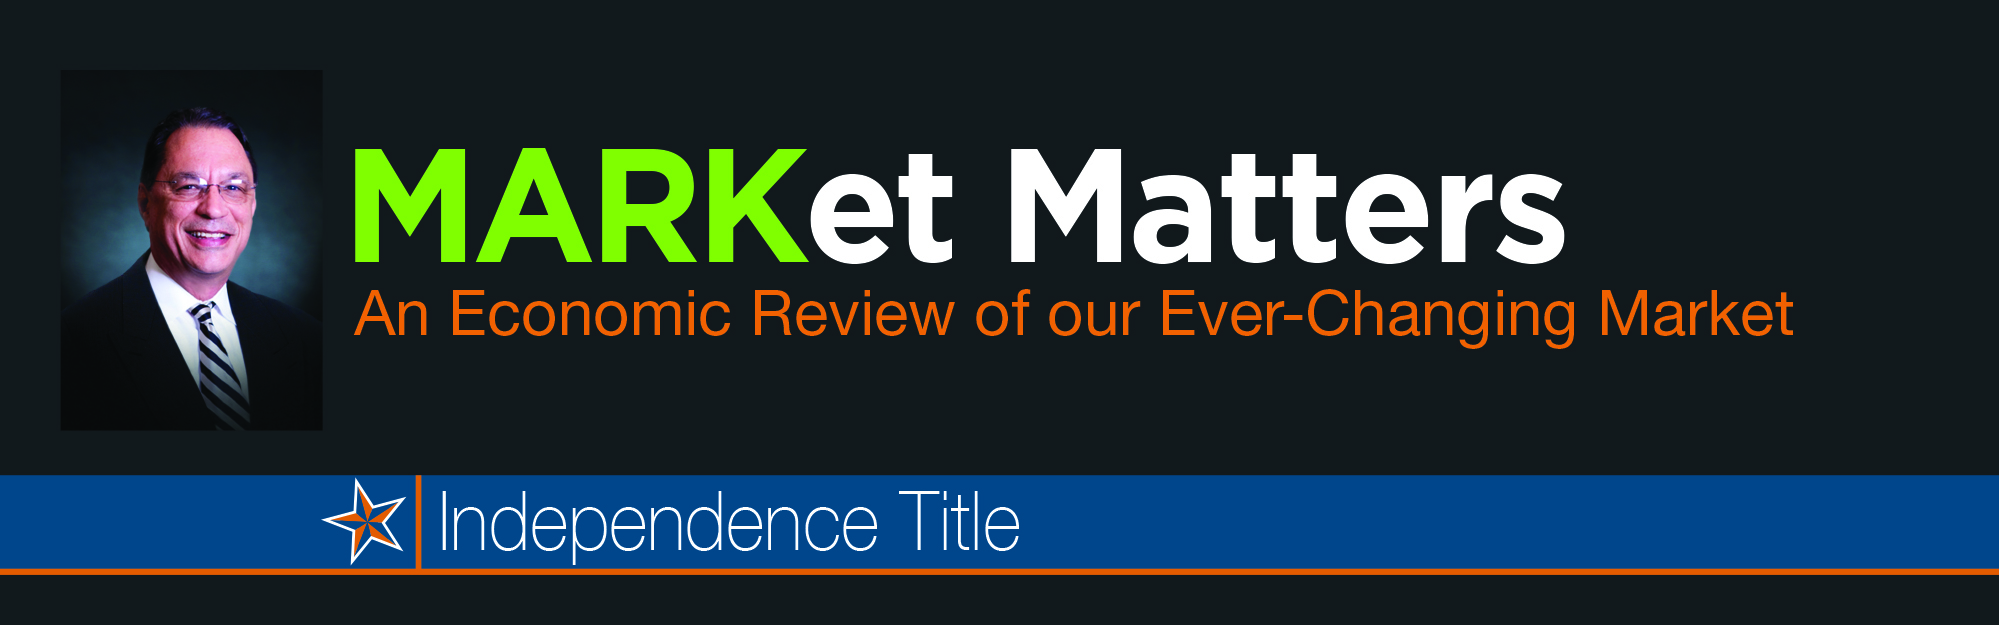 Header Image Market Matters An Economic Review of our Every Changing Market